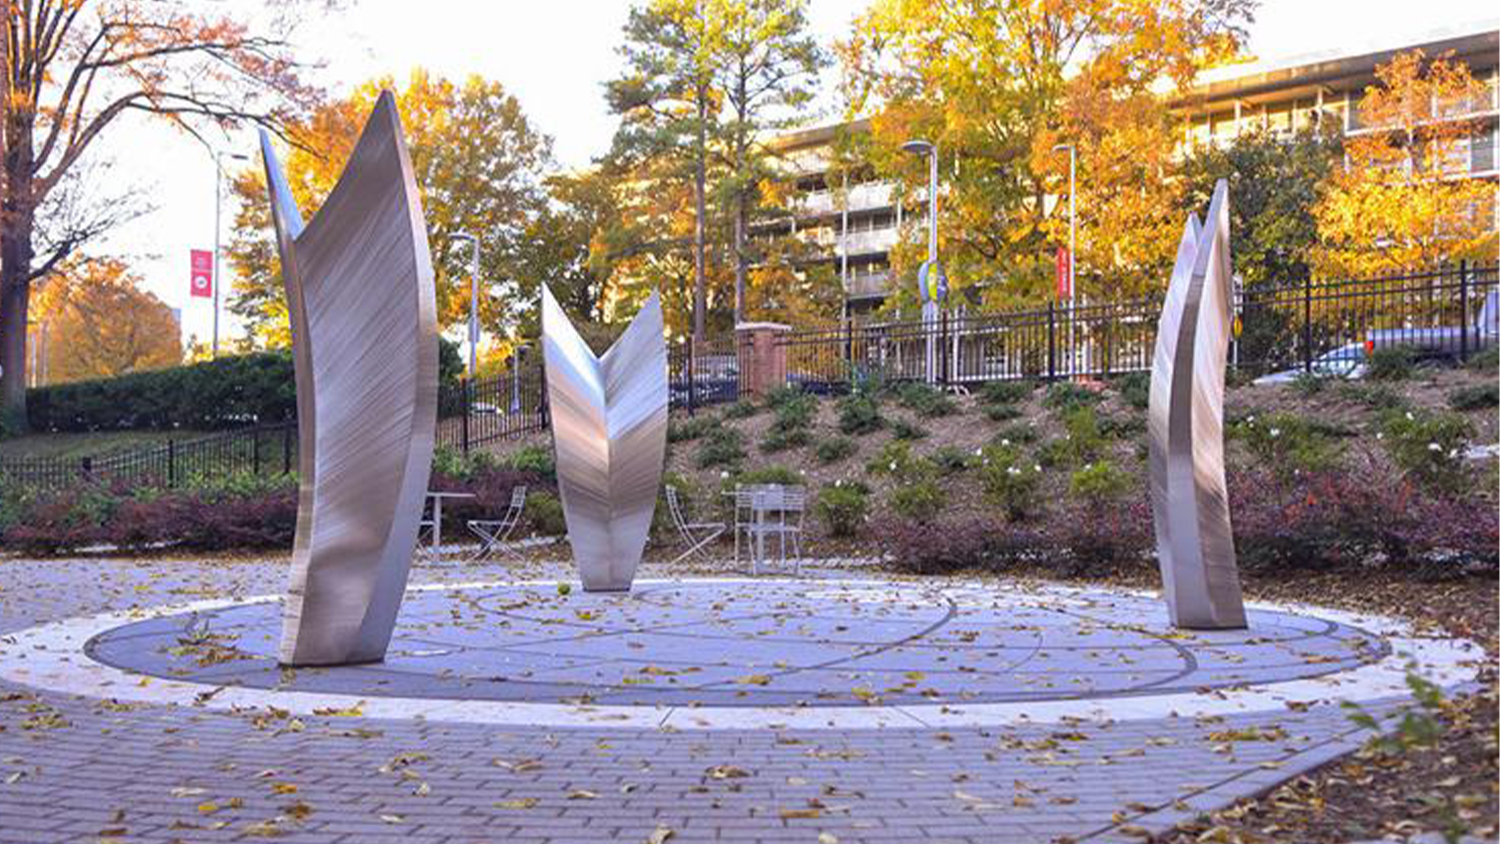 Global Courtyard (metal structures) in the fall.